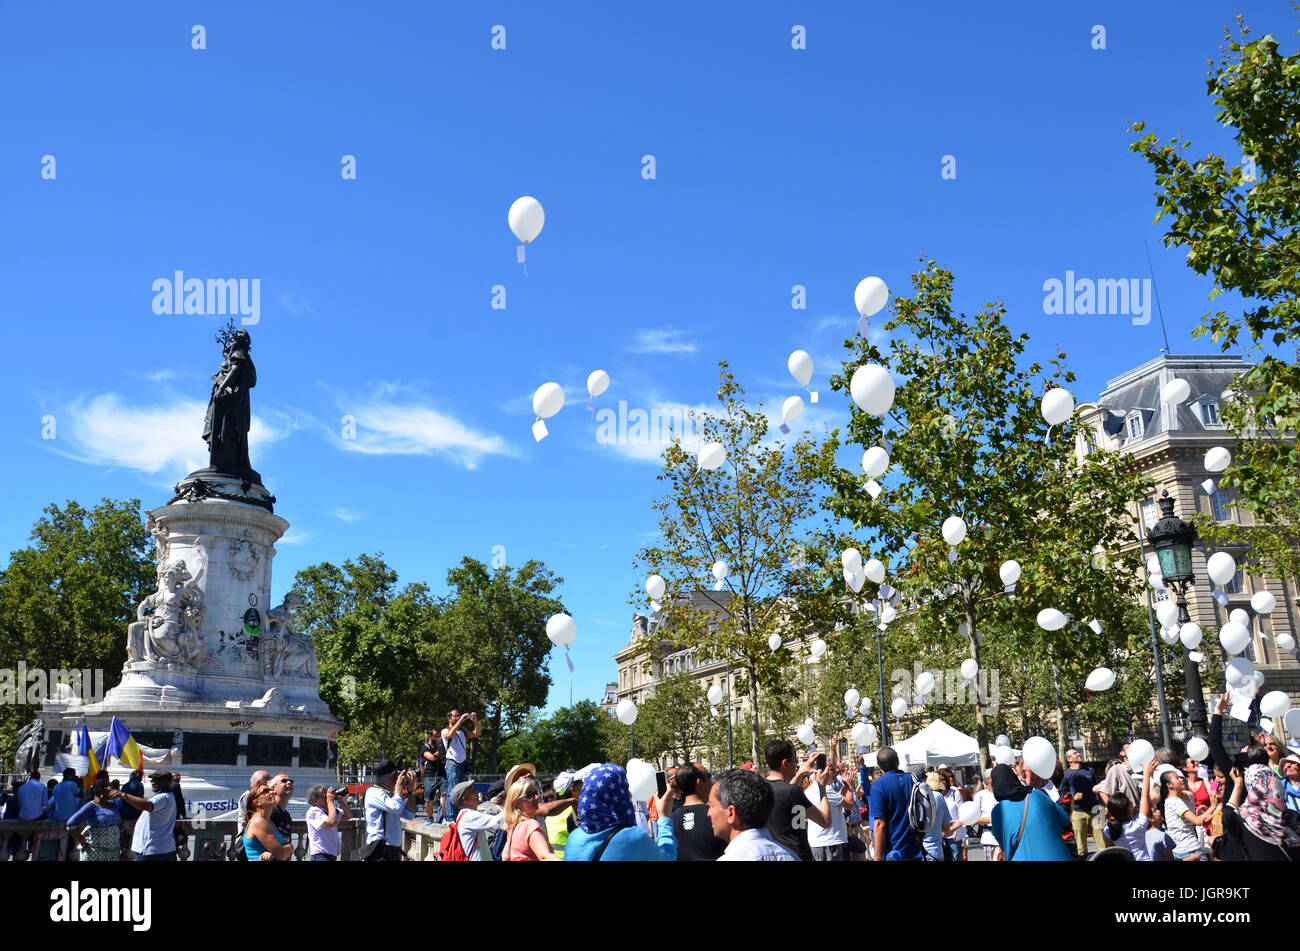 PARIS - AUG 7:  Protesters release balloons at an anti-nuclear weapon rally at the Place de la Republique in Paris, France on August 7, 2016. Stock Photo